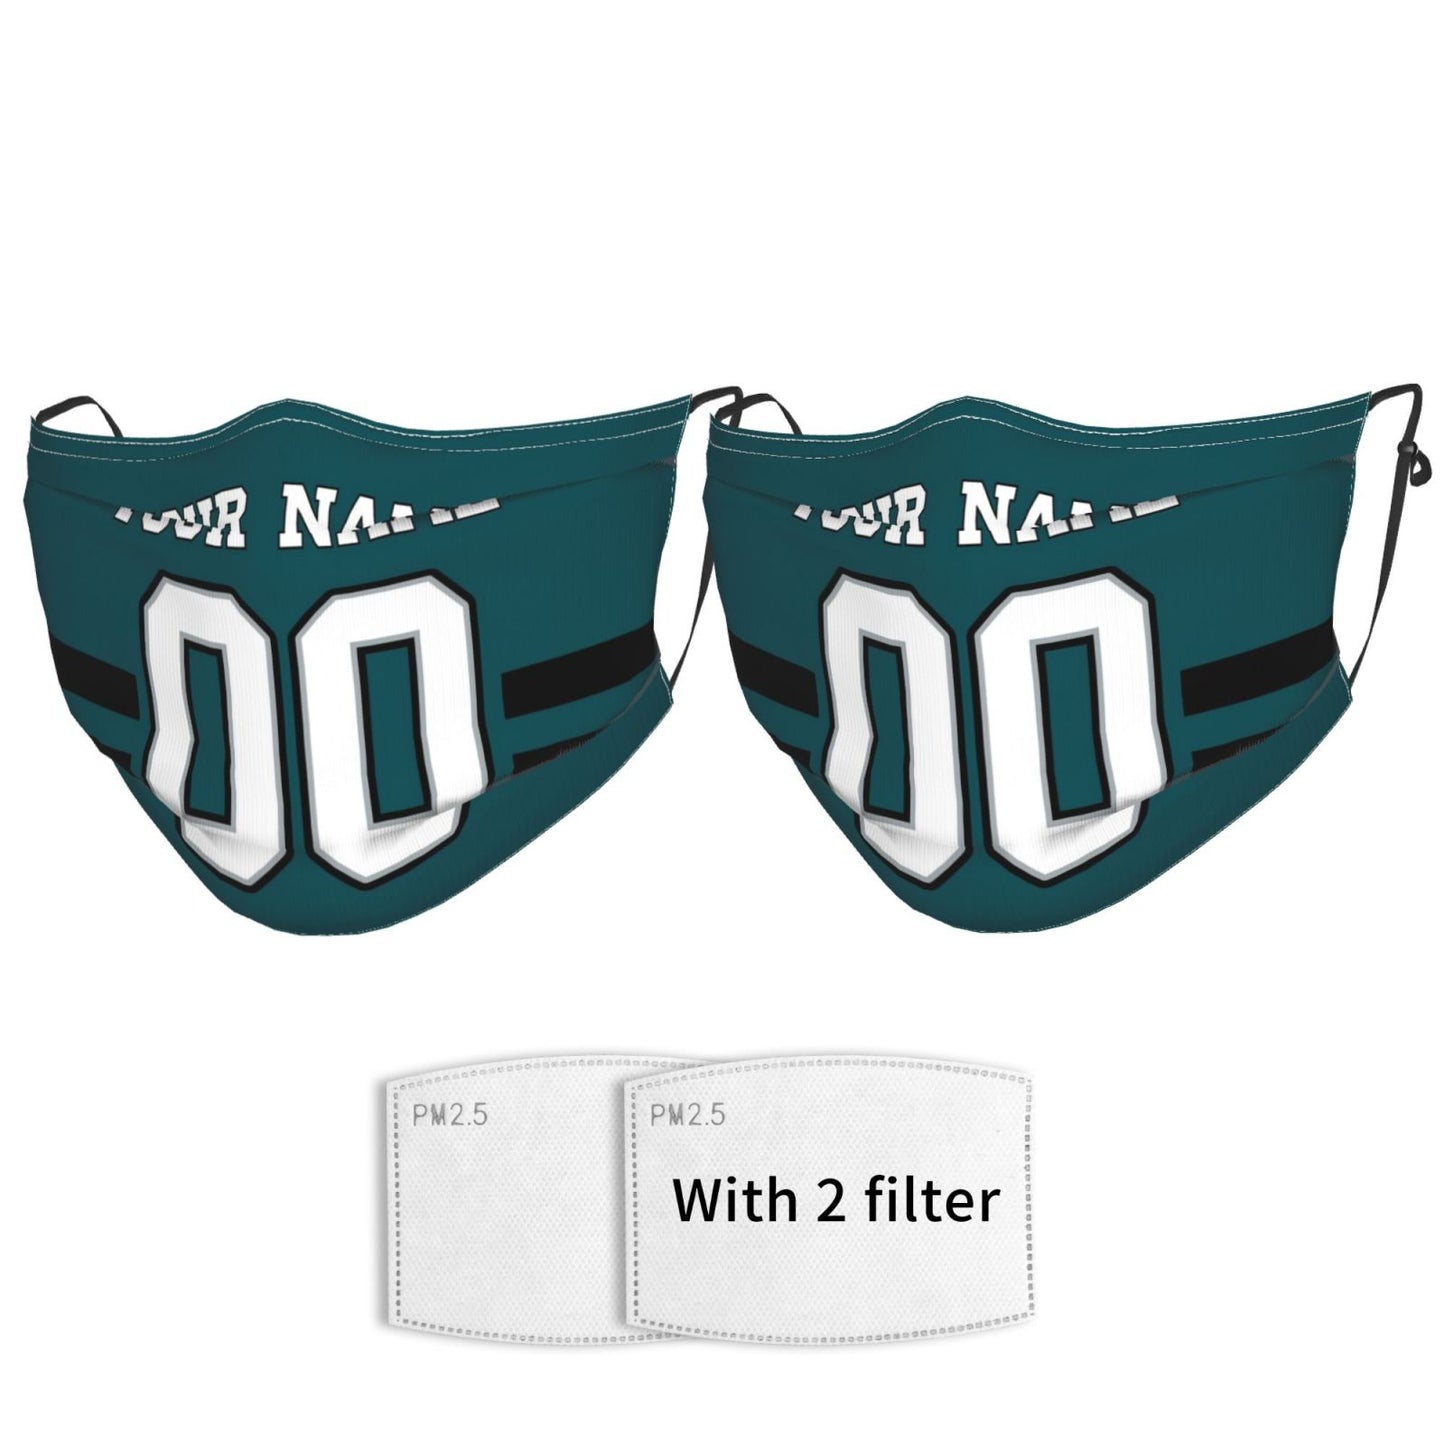 2-Pack Philadelphia Eagles Face Covering Football Team Decorative Adult Face Mask With Filters PM 2.5 Green